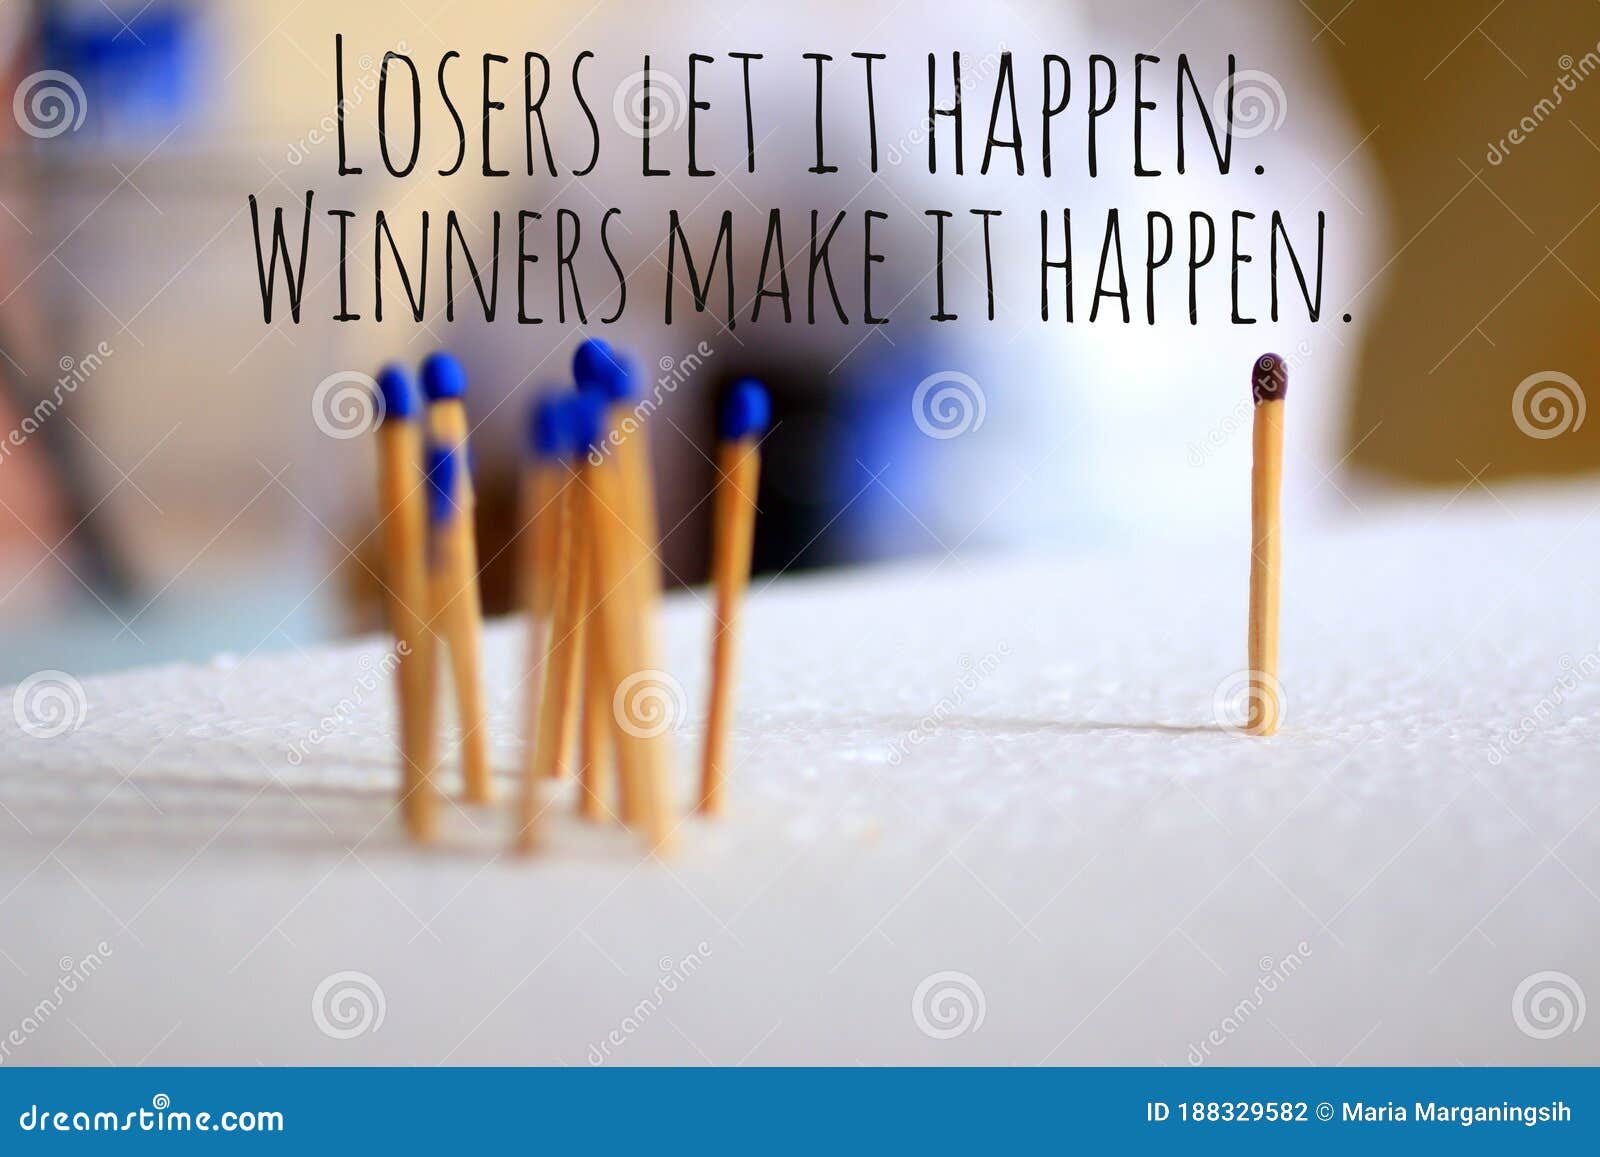 inspirational motivational quote - losers let it happen. winners make it happen. business metaphor concept with background of